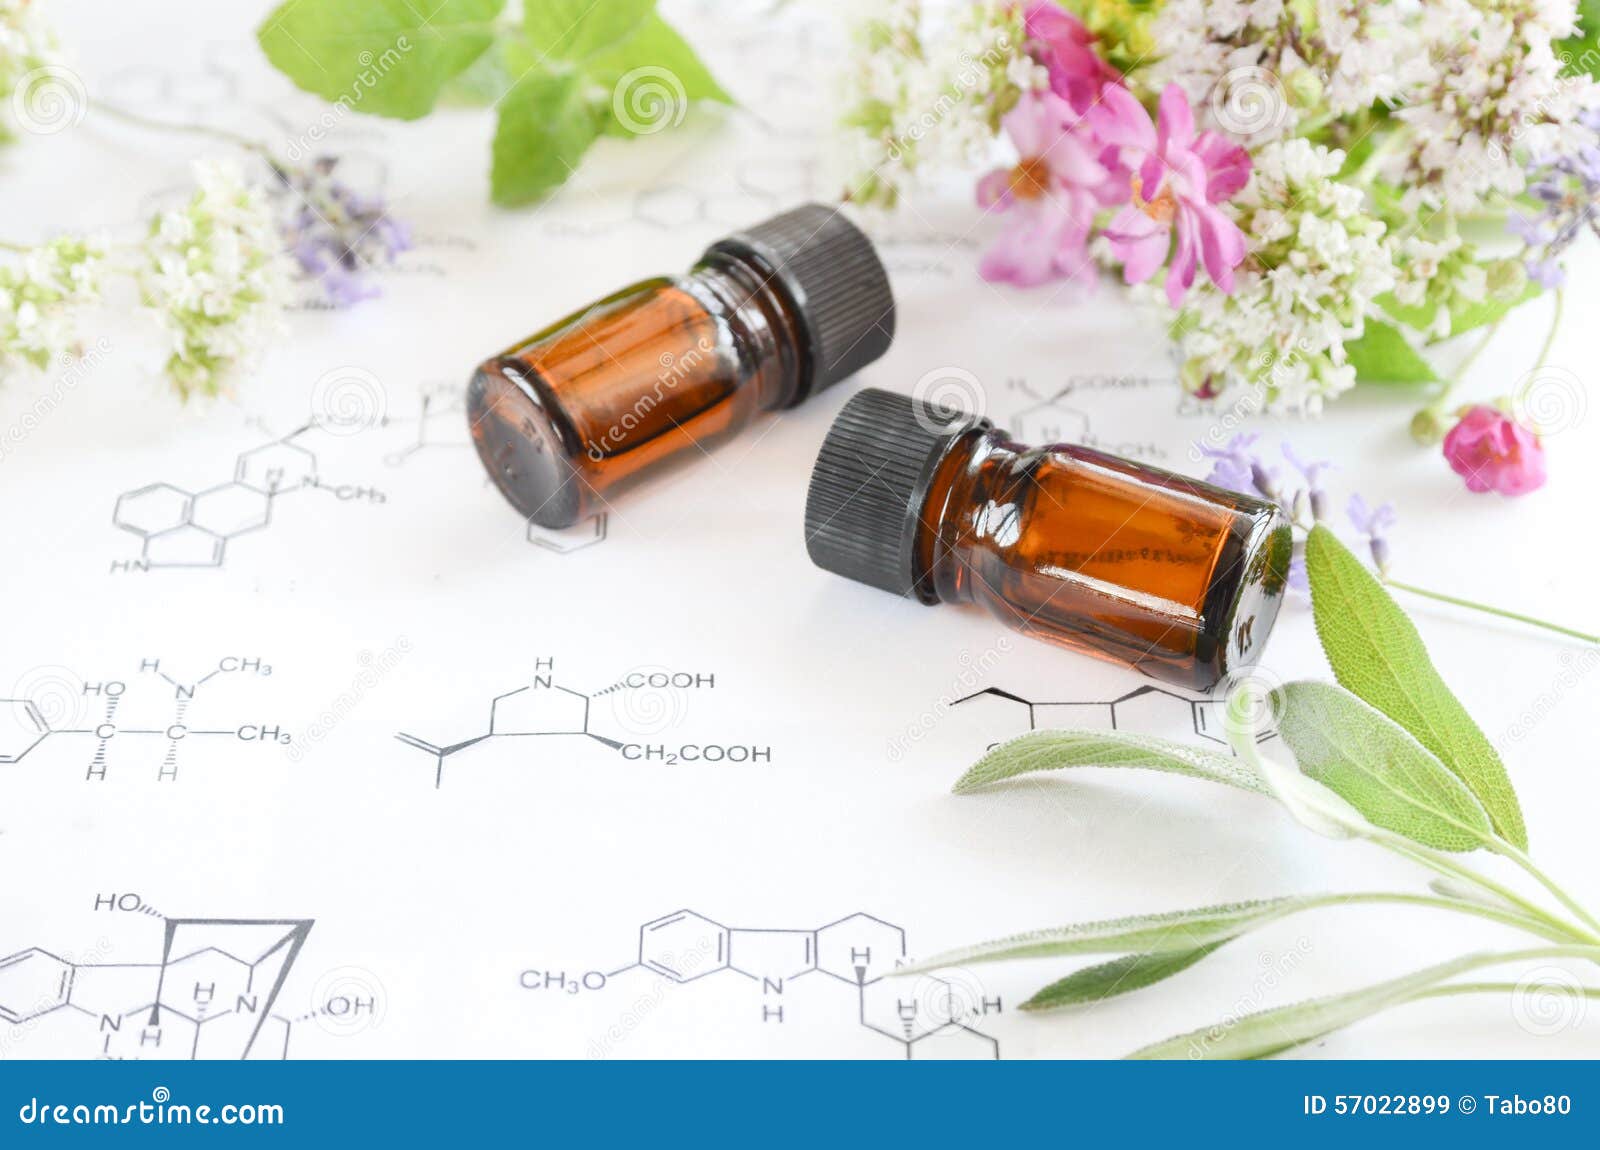 essential oils on science sheet